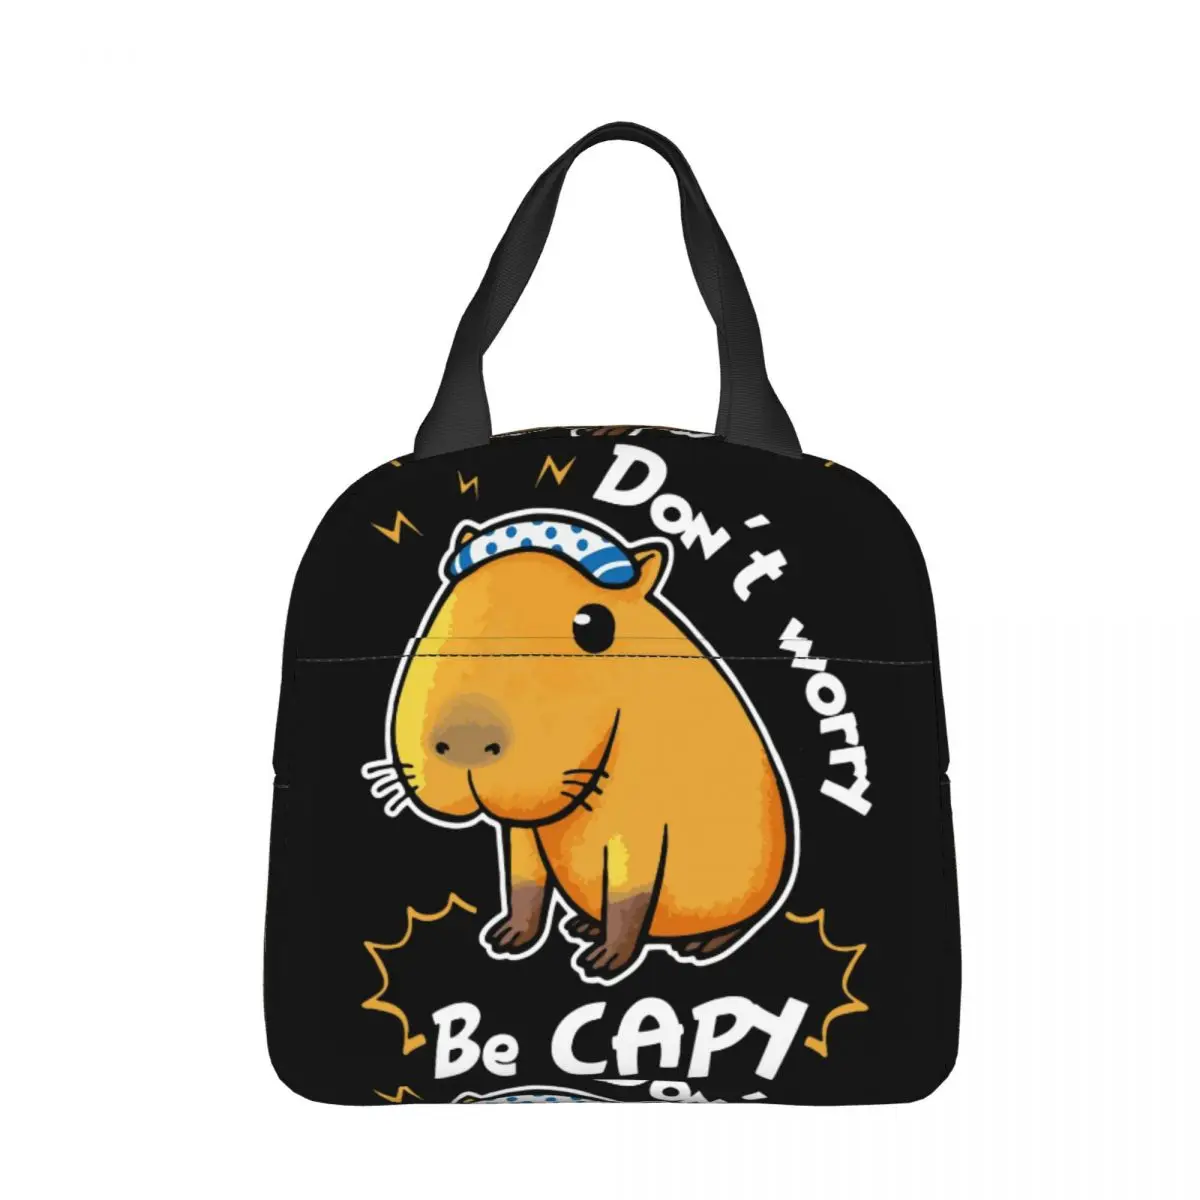 

Capybara Don't Worry Be Capy Insulated Lunch Bags Thermal Bag Meal Container Kawaii Animal Portable Lunch Box Tote Office Picnic